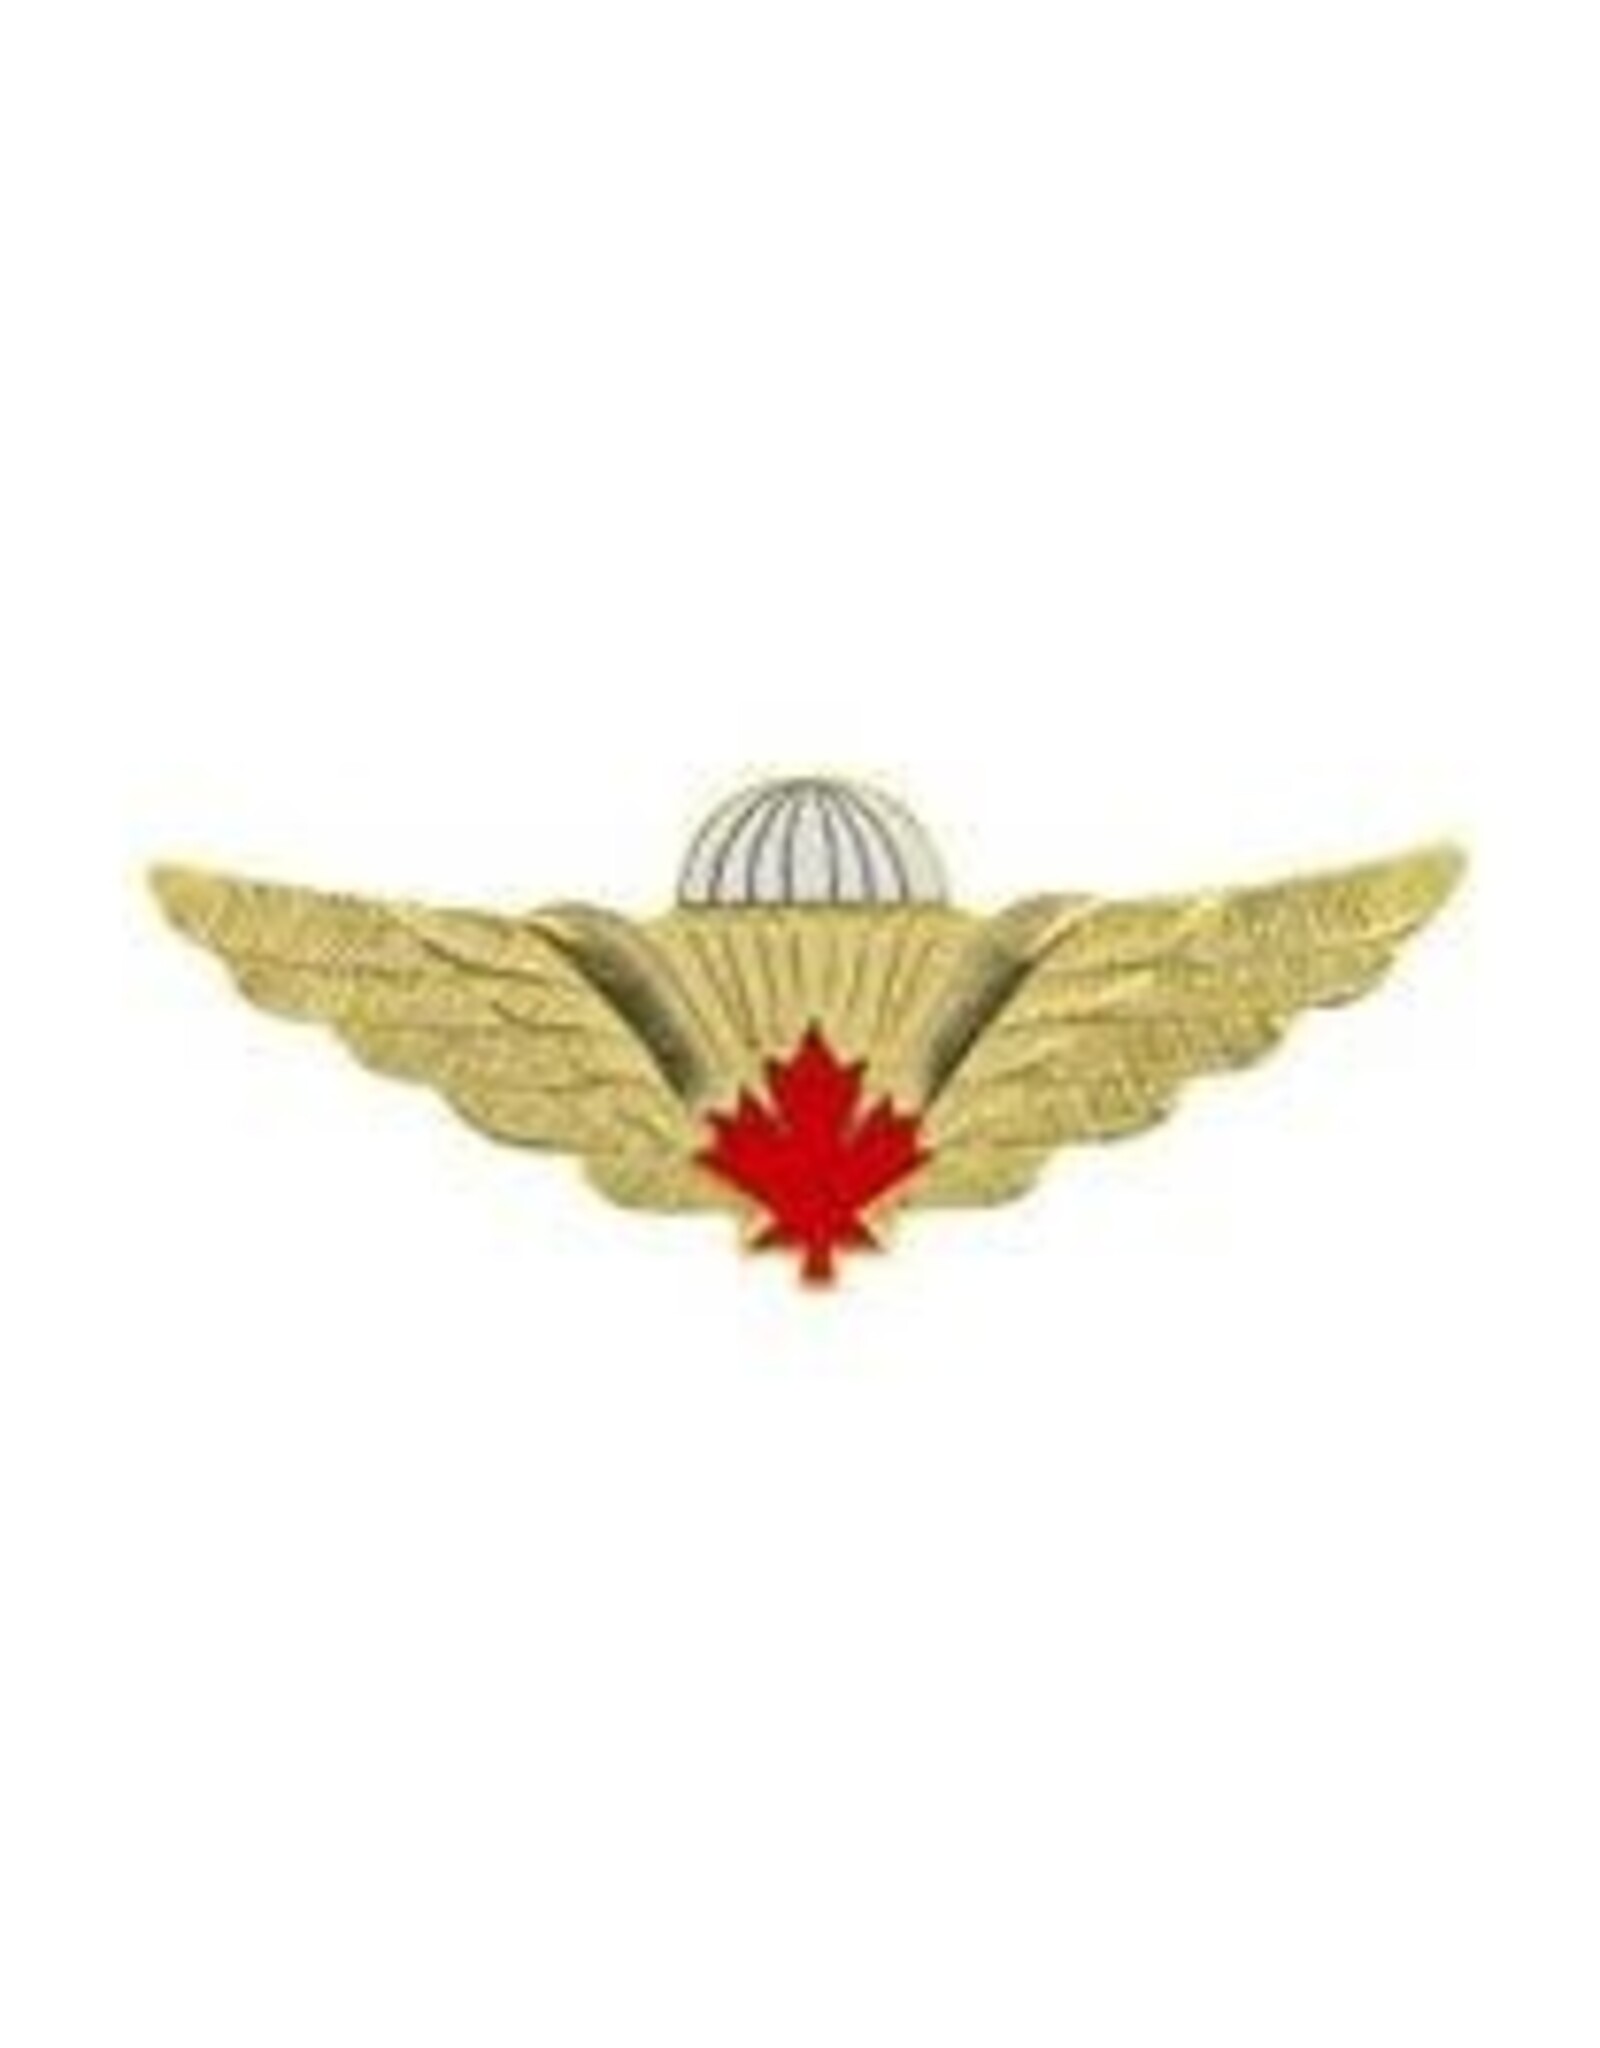 Pin - Wing Canadian Jump Gold/Red